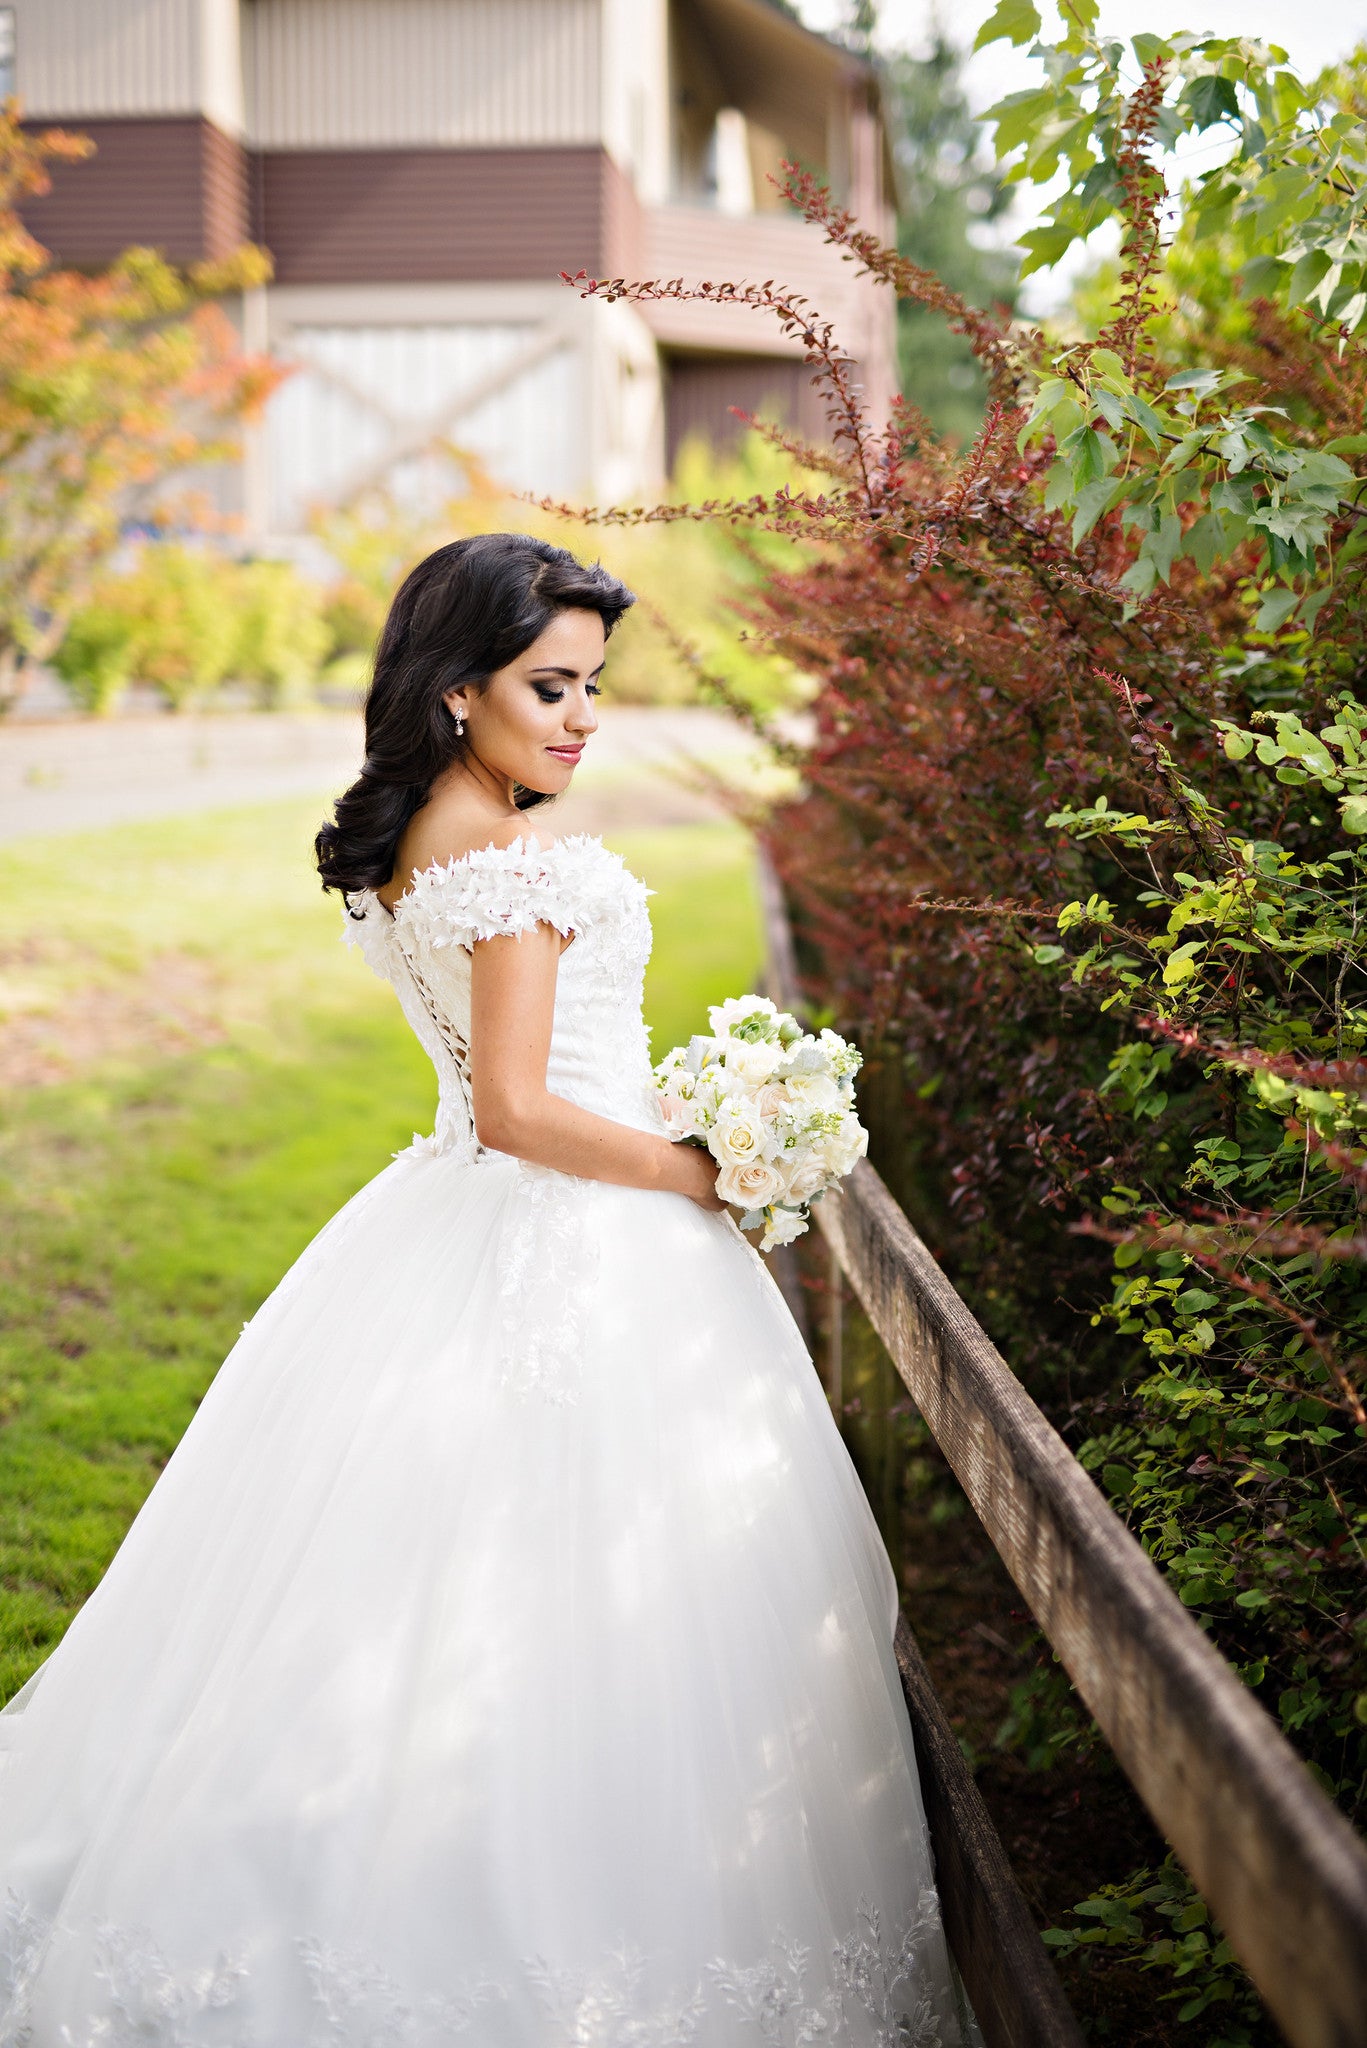 Strapless Off The Shoulder Ball Gown Wedding Dress With 3D Florals